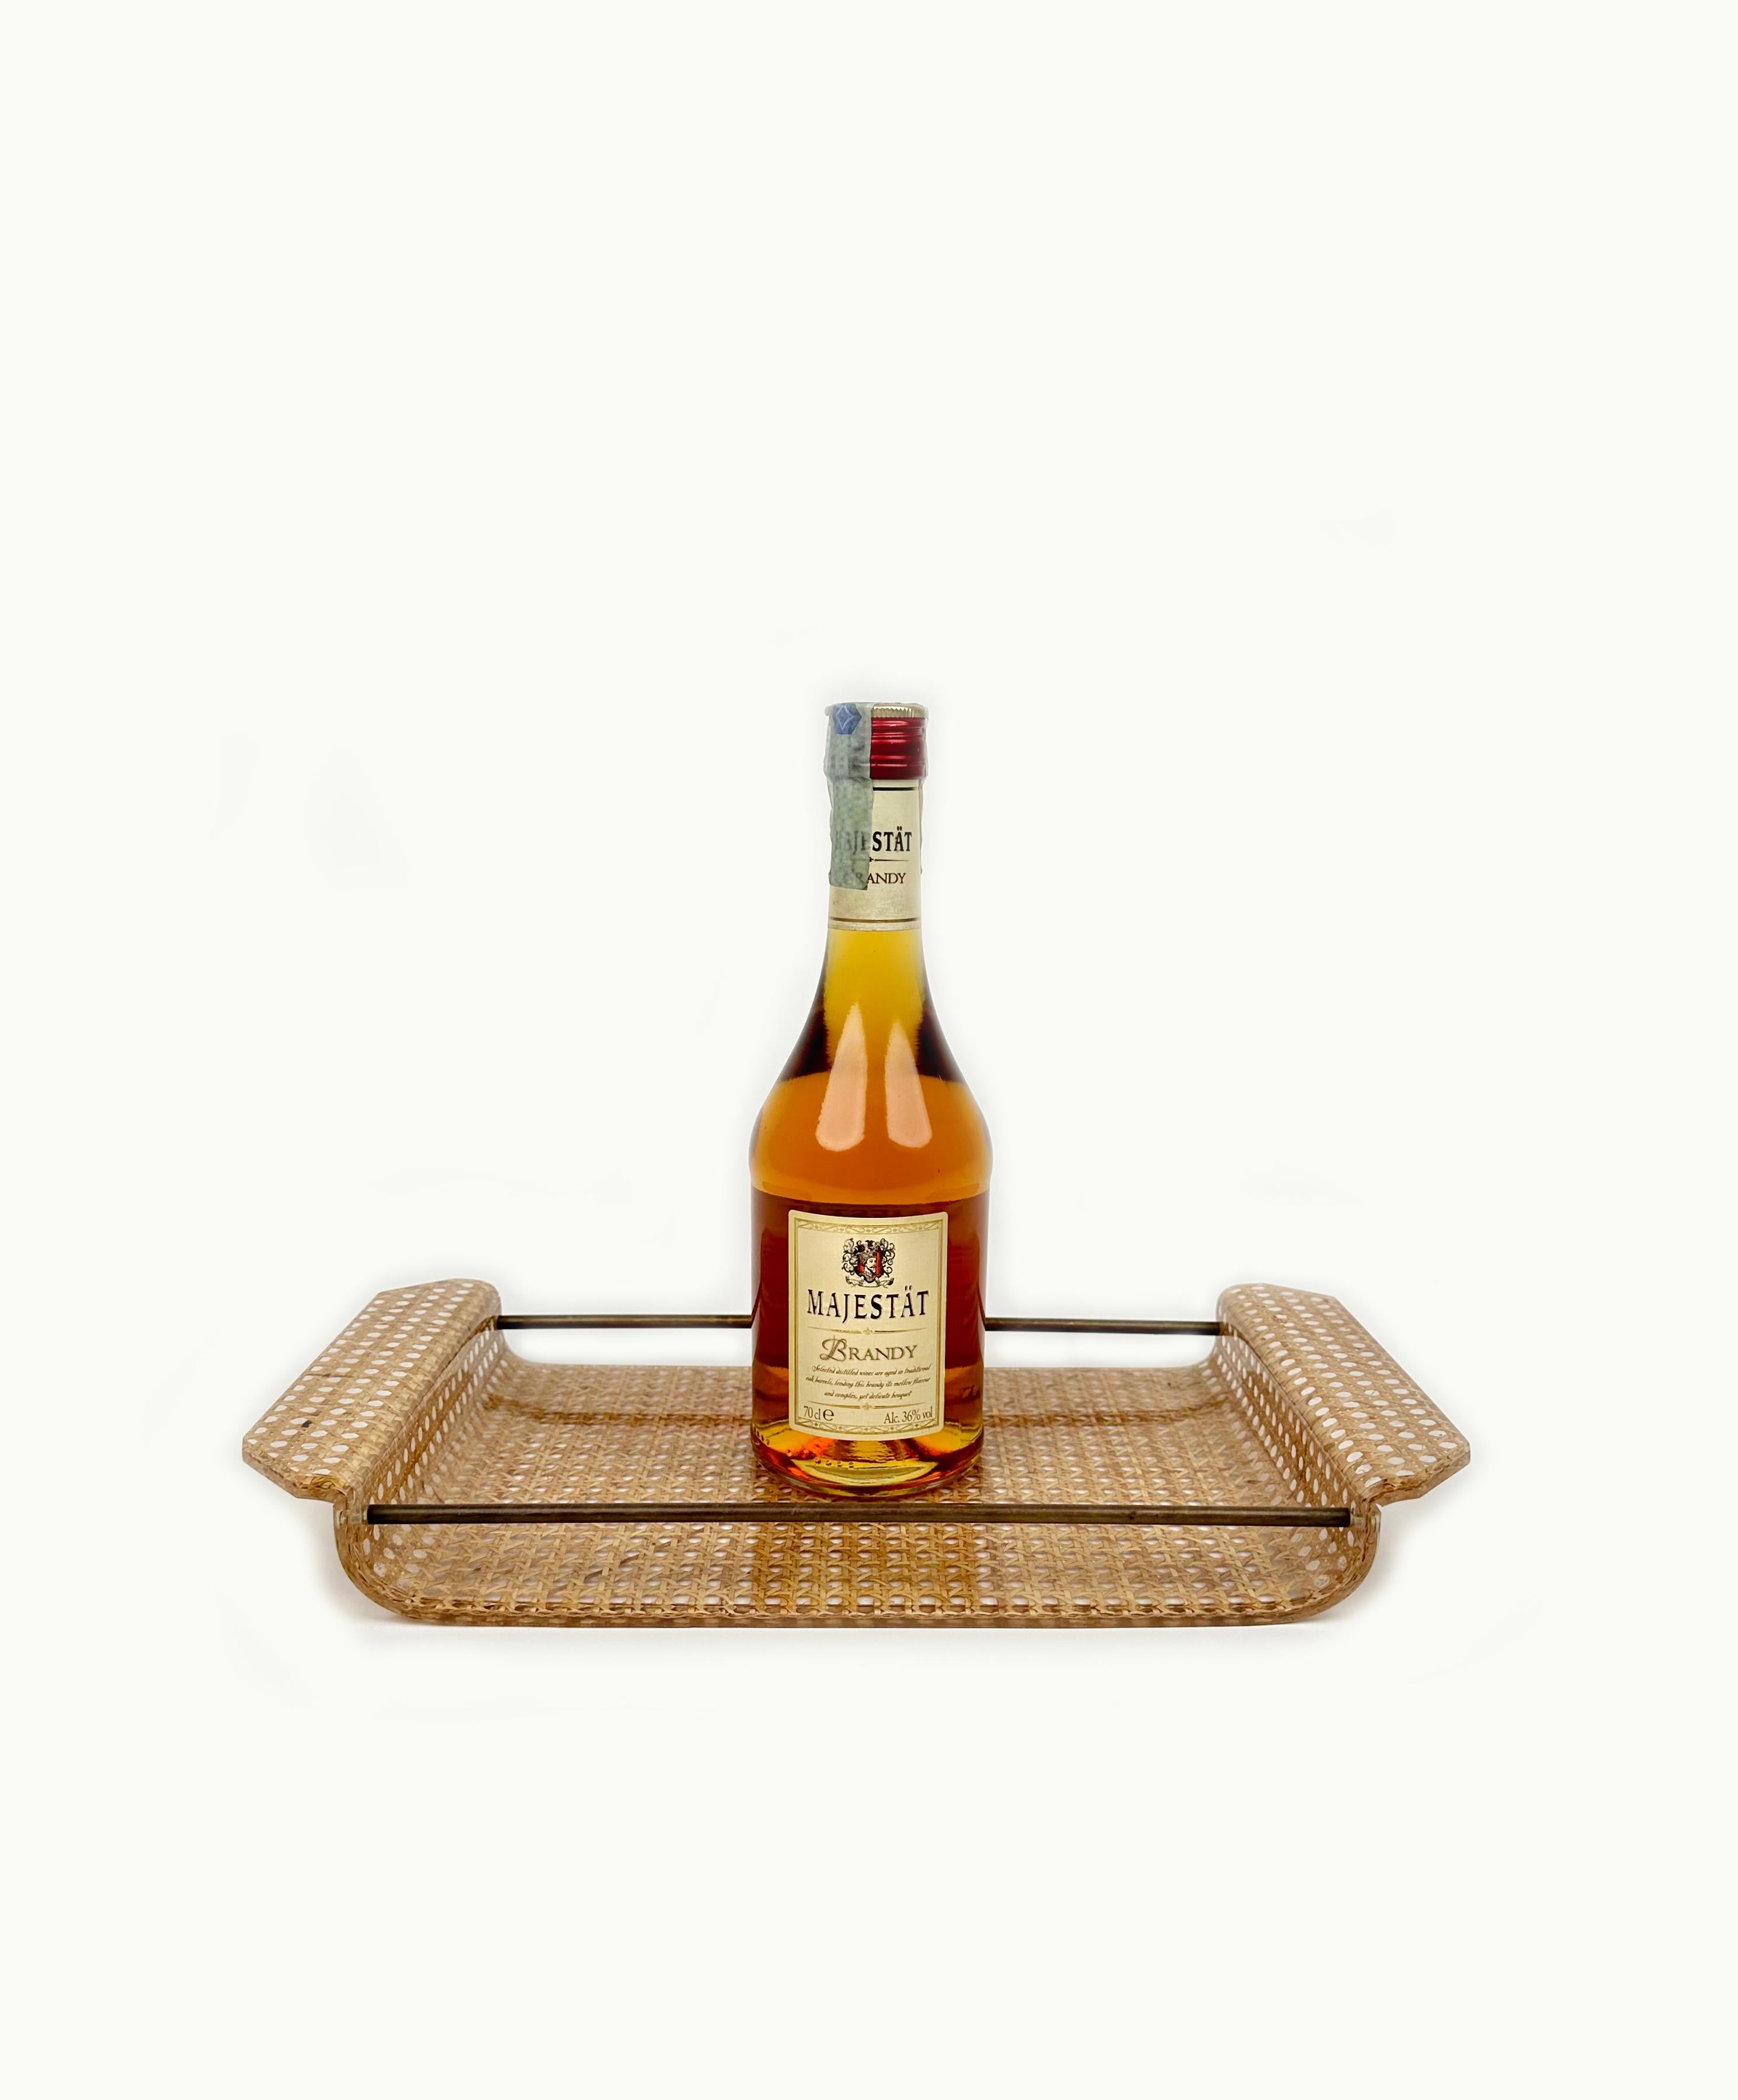 Serving Tray Lucite, Rattan and Brass Christian Dior Style, Italy, 1970s For Sale 1